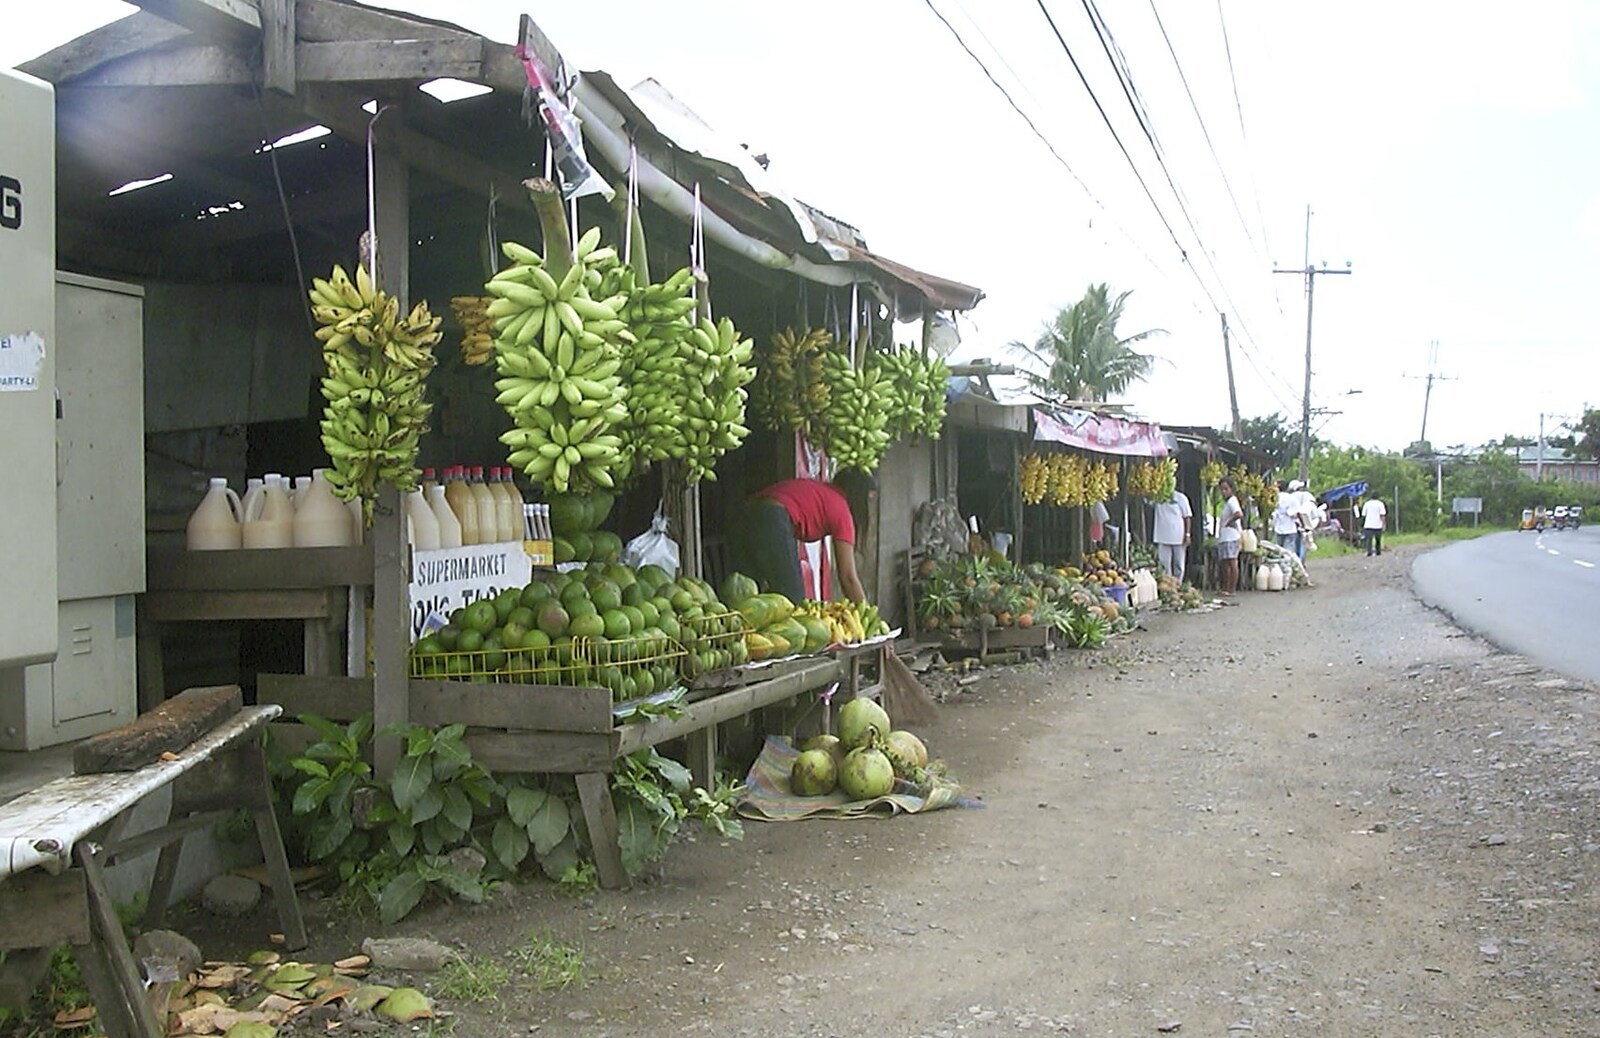 A fruit seller's shack from A Postcard From Manila: a Working Trip, Philippines - 9th July 2004